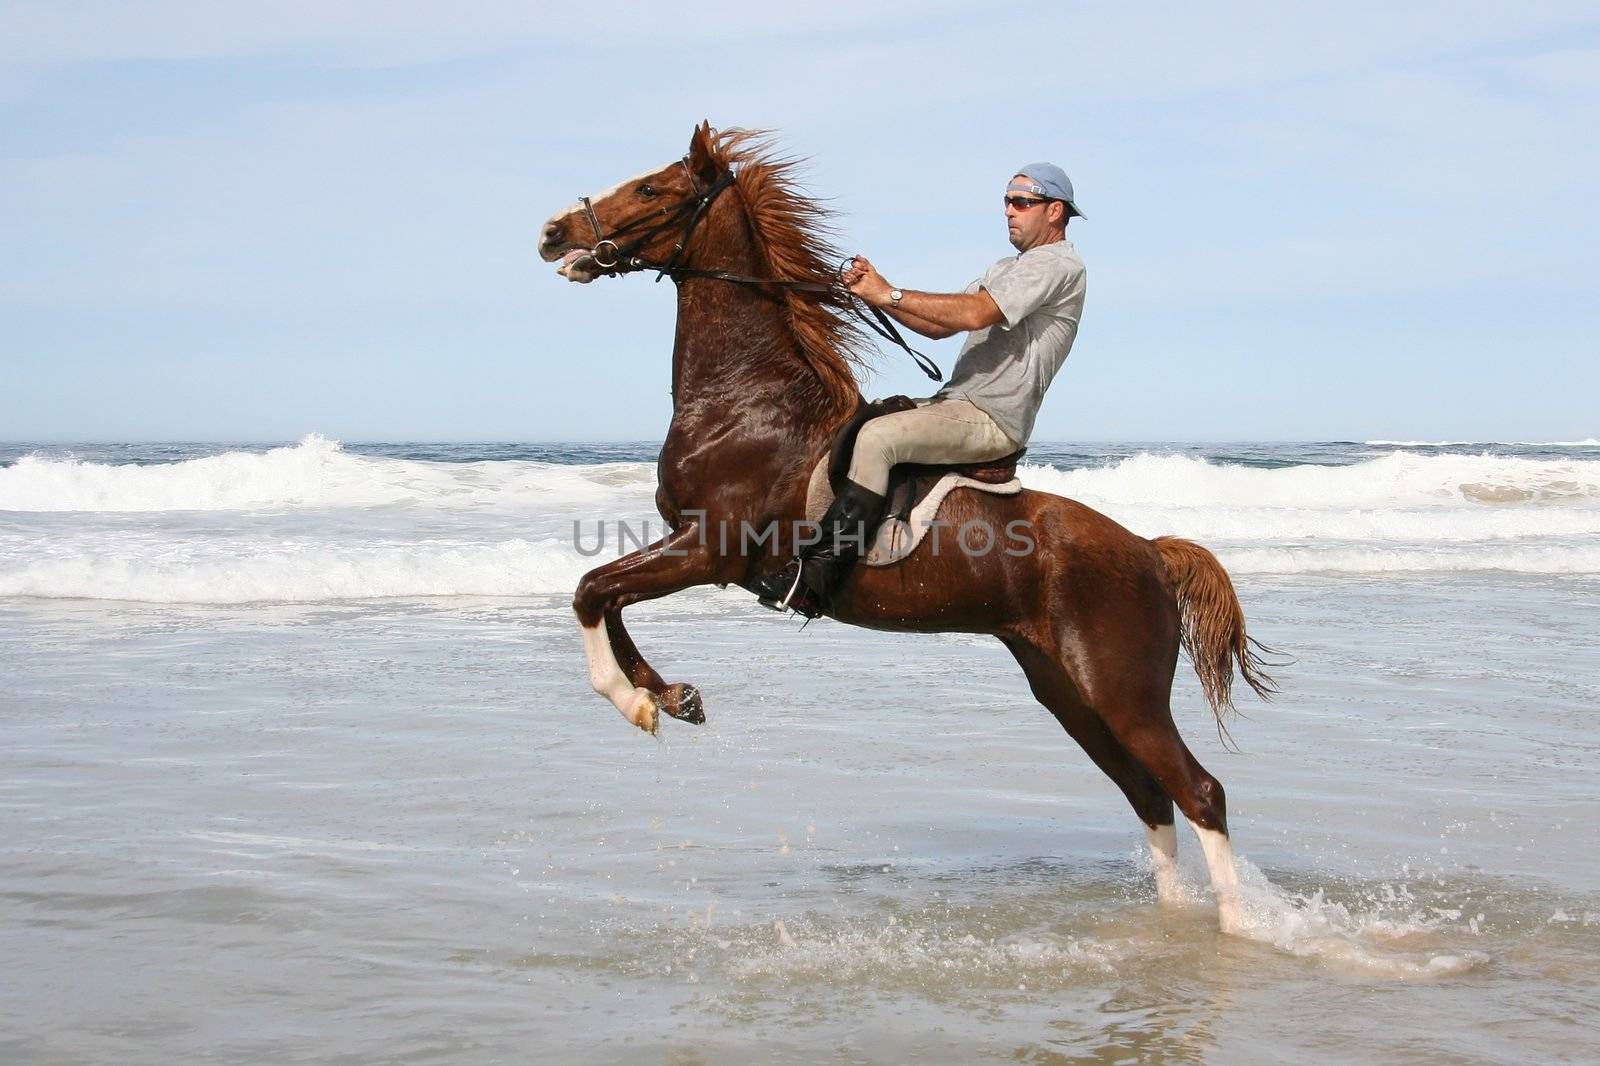 Rearing brown horse and rider in the water at the beach